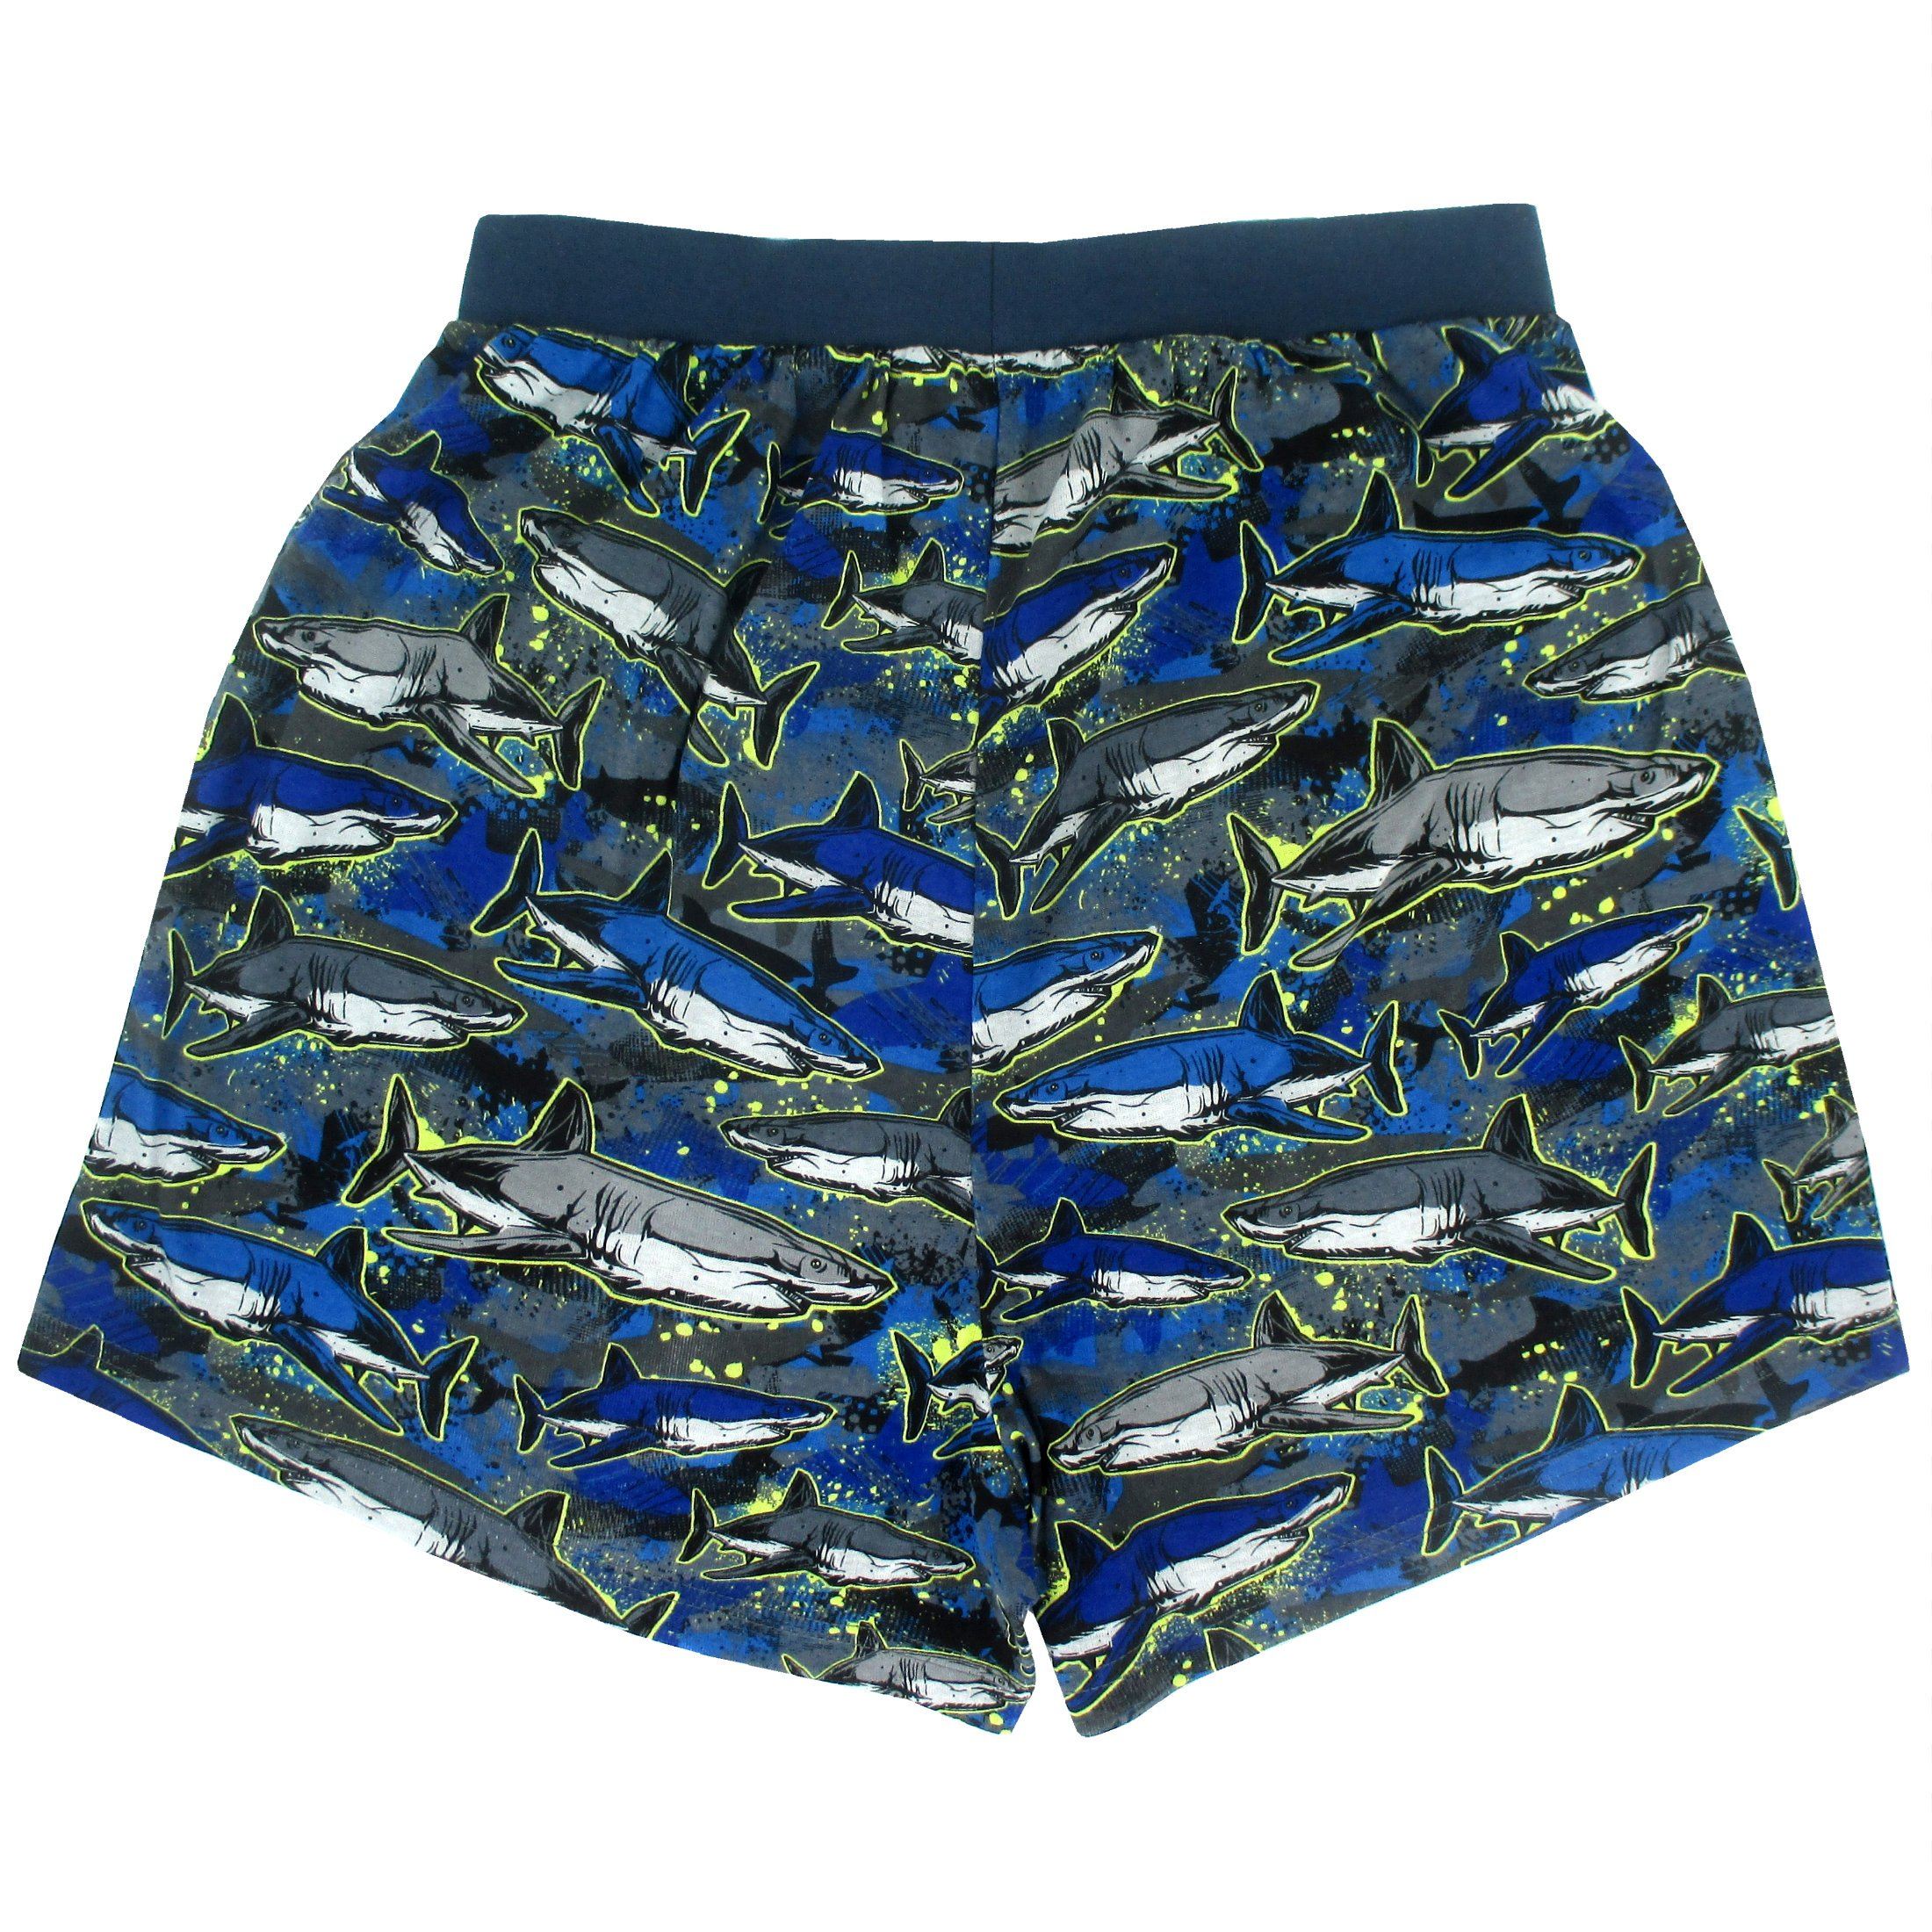 Men's Great White Shark All Over Print Cotton Stretch Knit Boxer Shorts